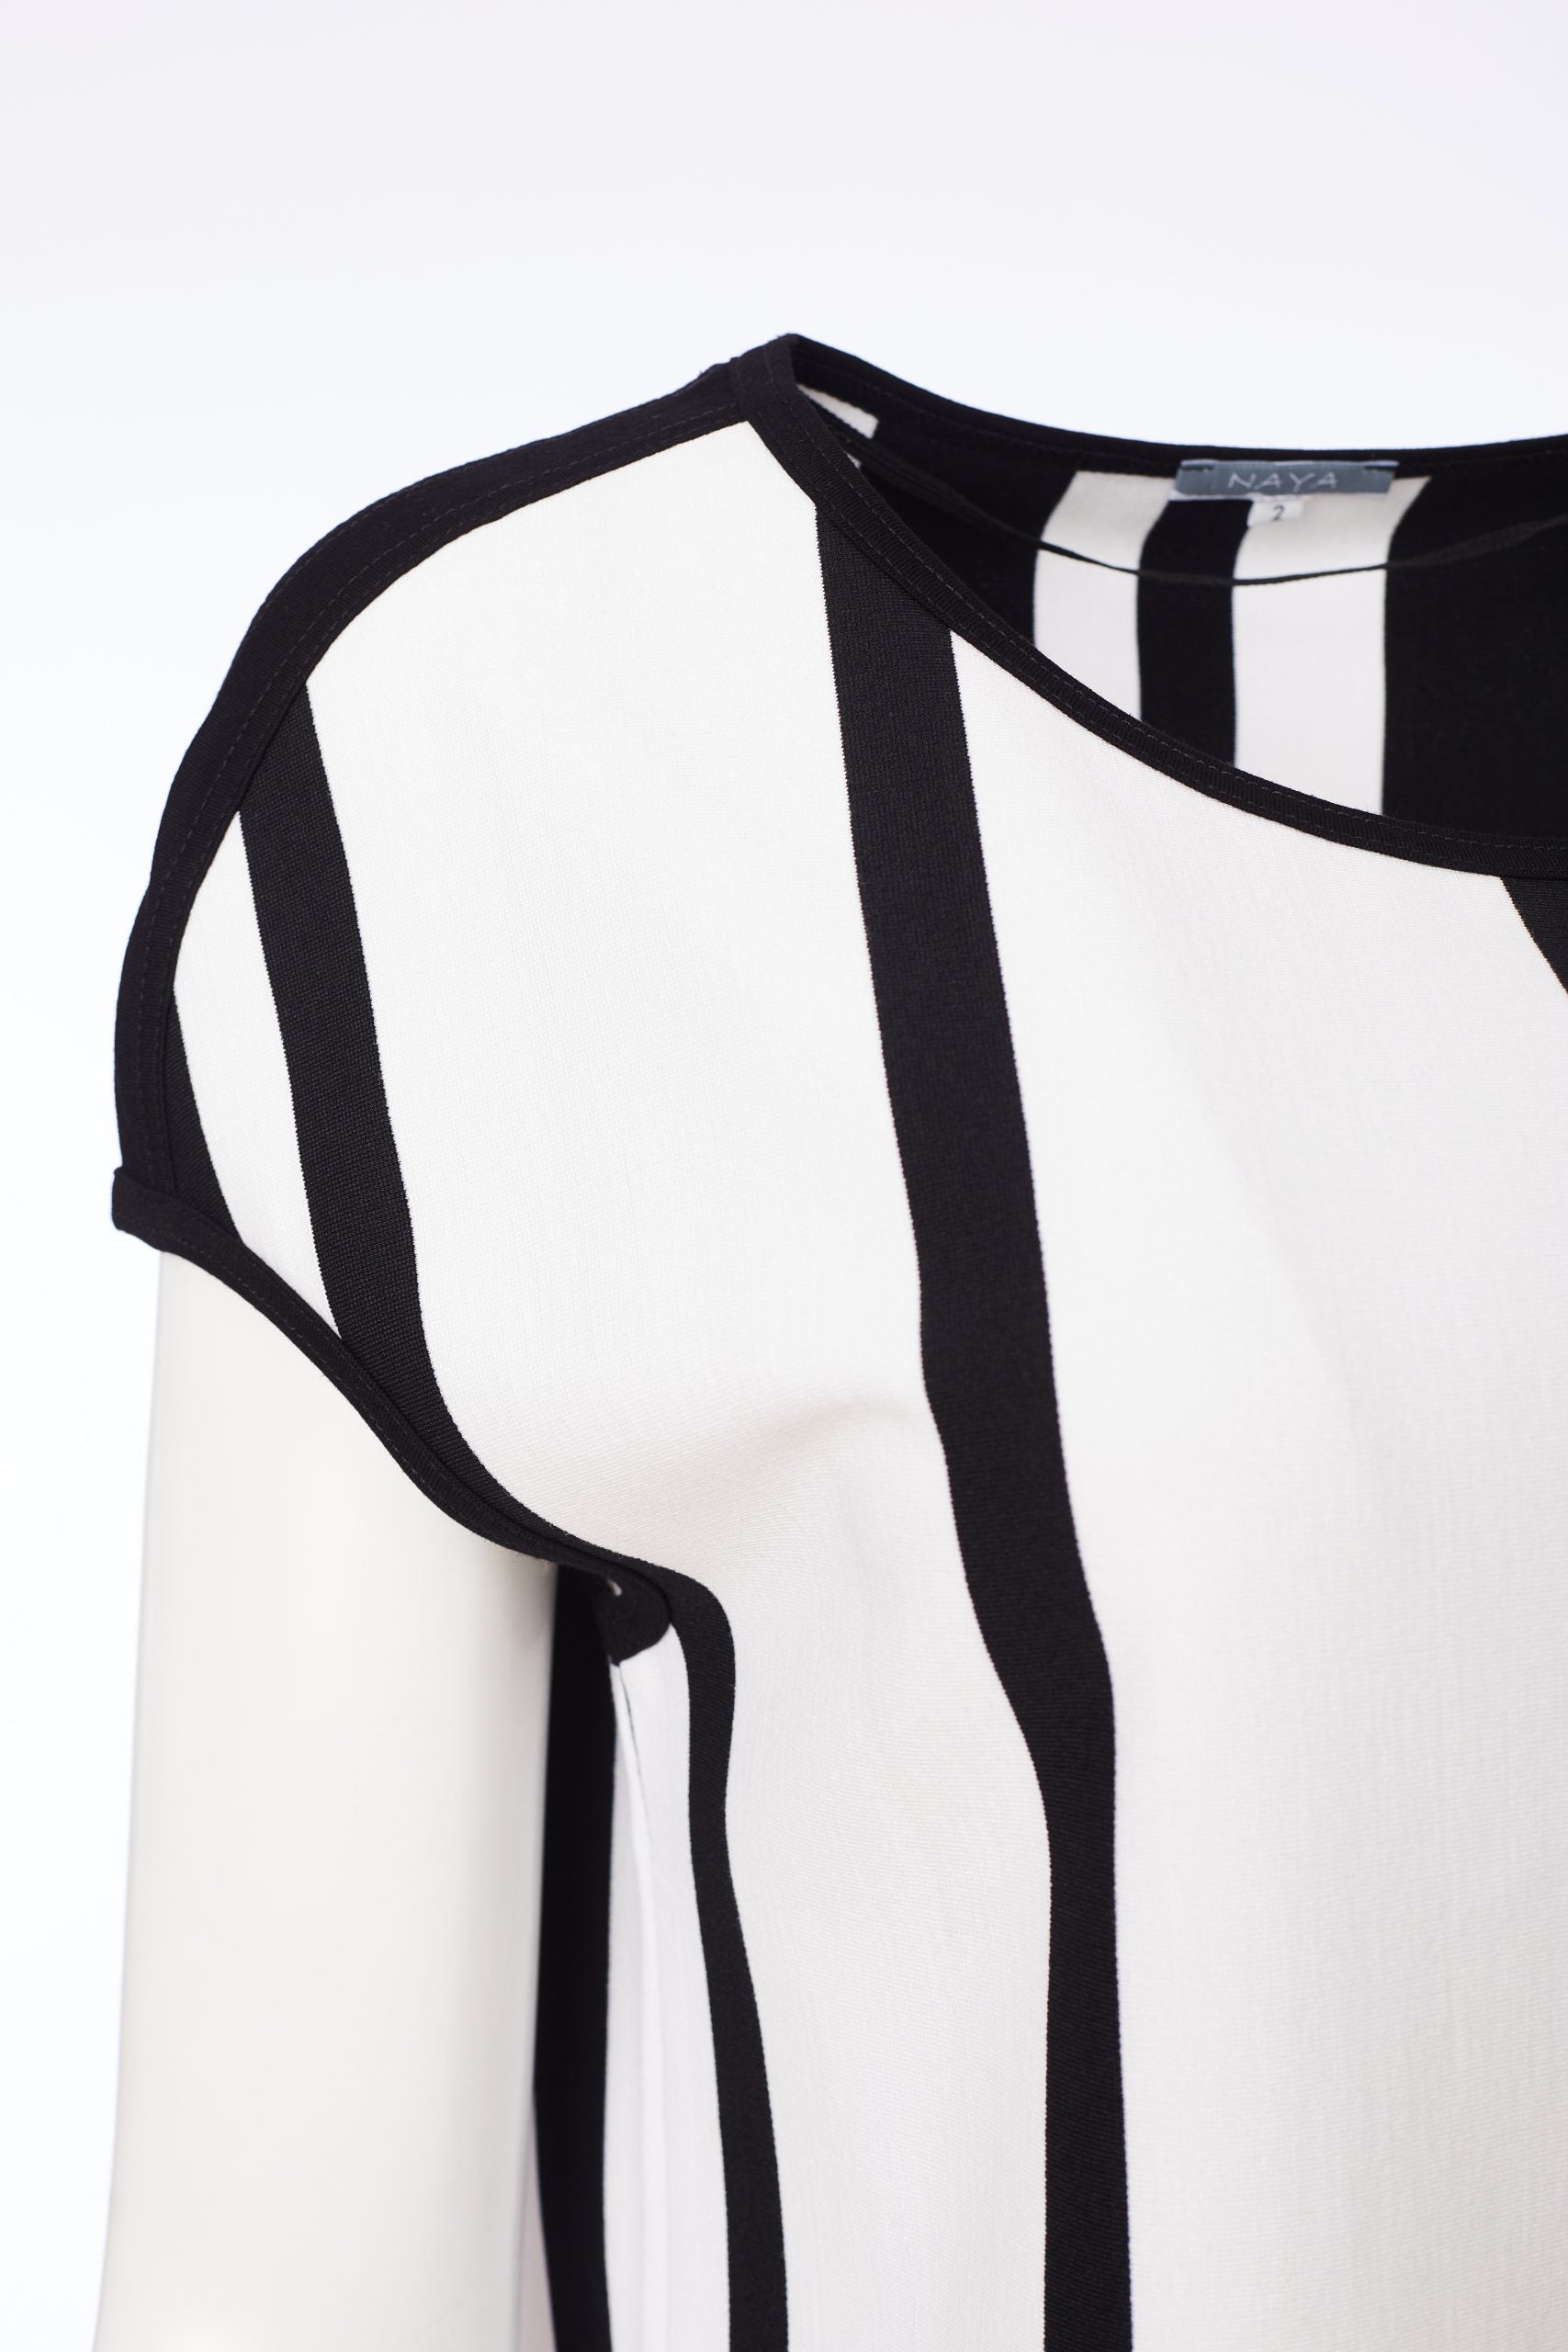 Stripped Round Neck Top in Black and White